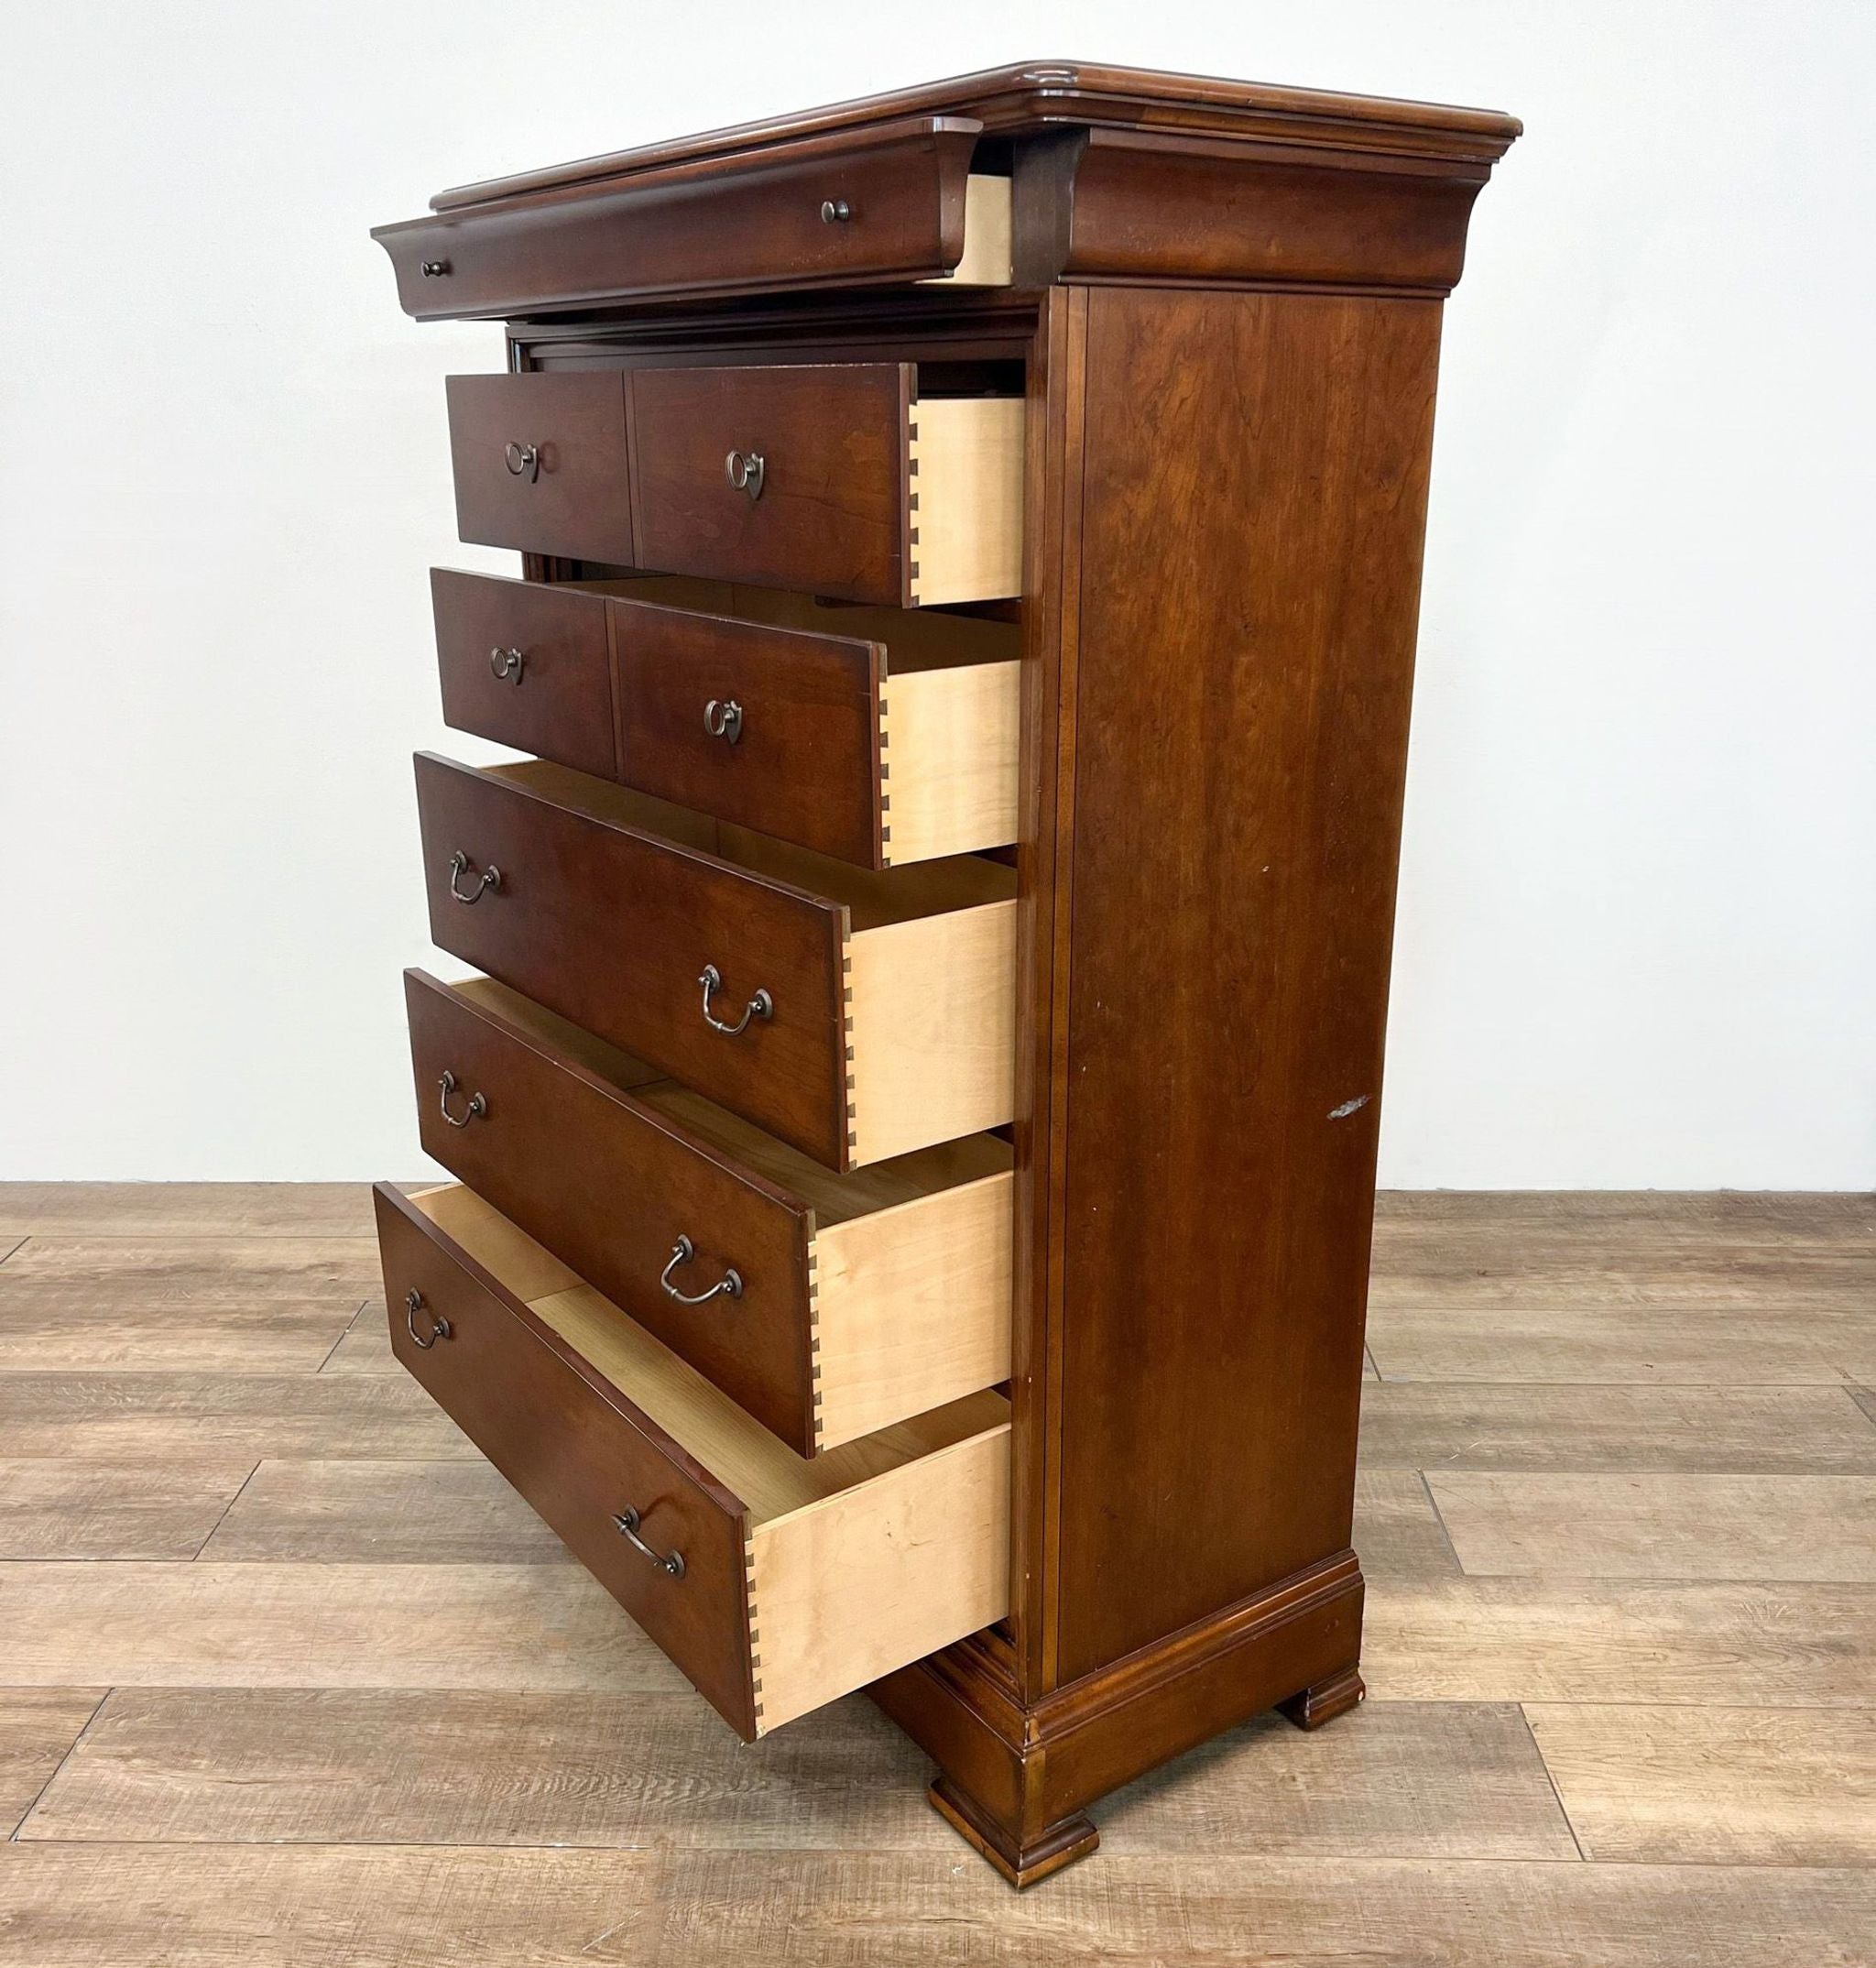 Thomasville traditional chest of drawers with open dovetail drawers showing craftsmanship, in Louis Philippe style.